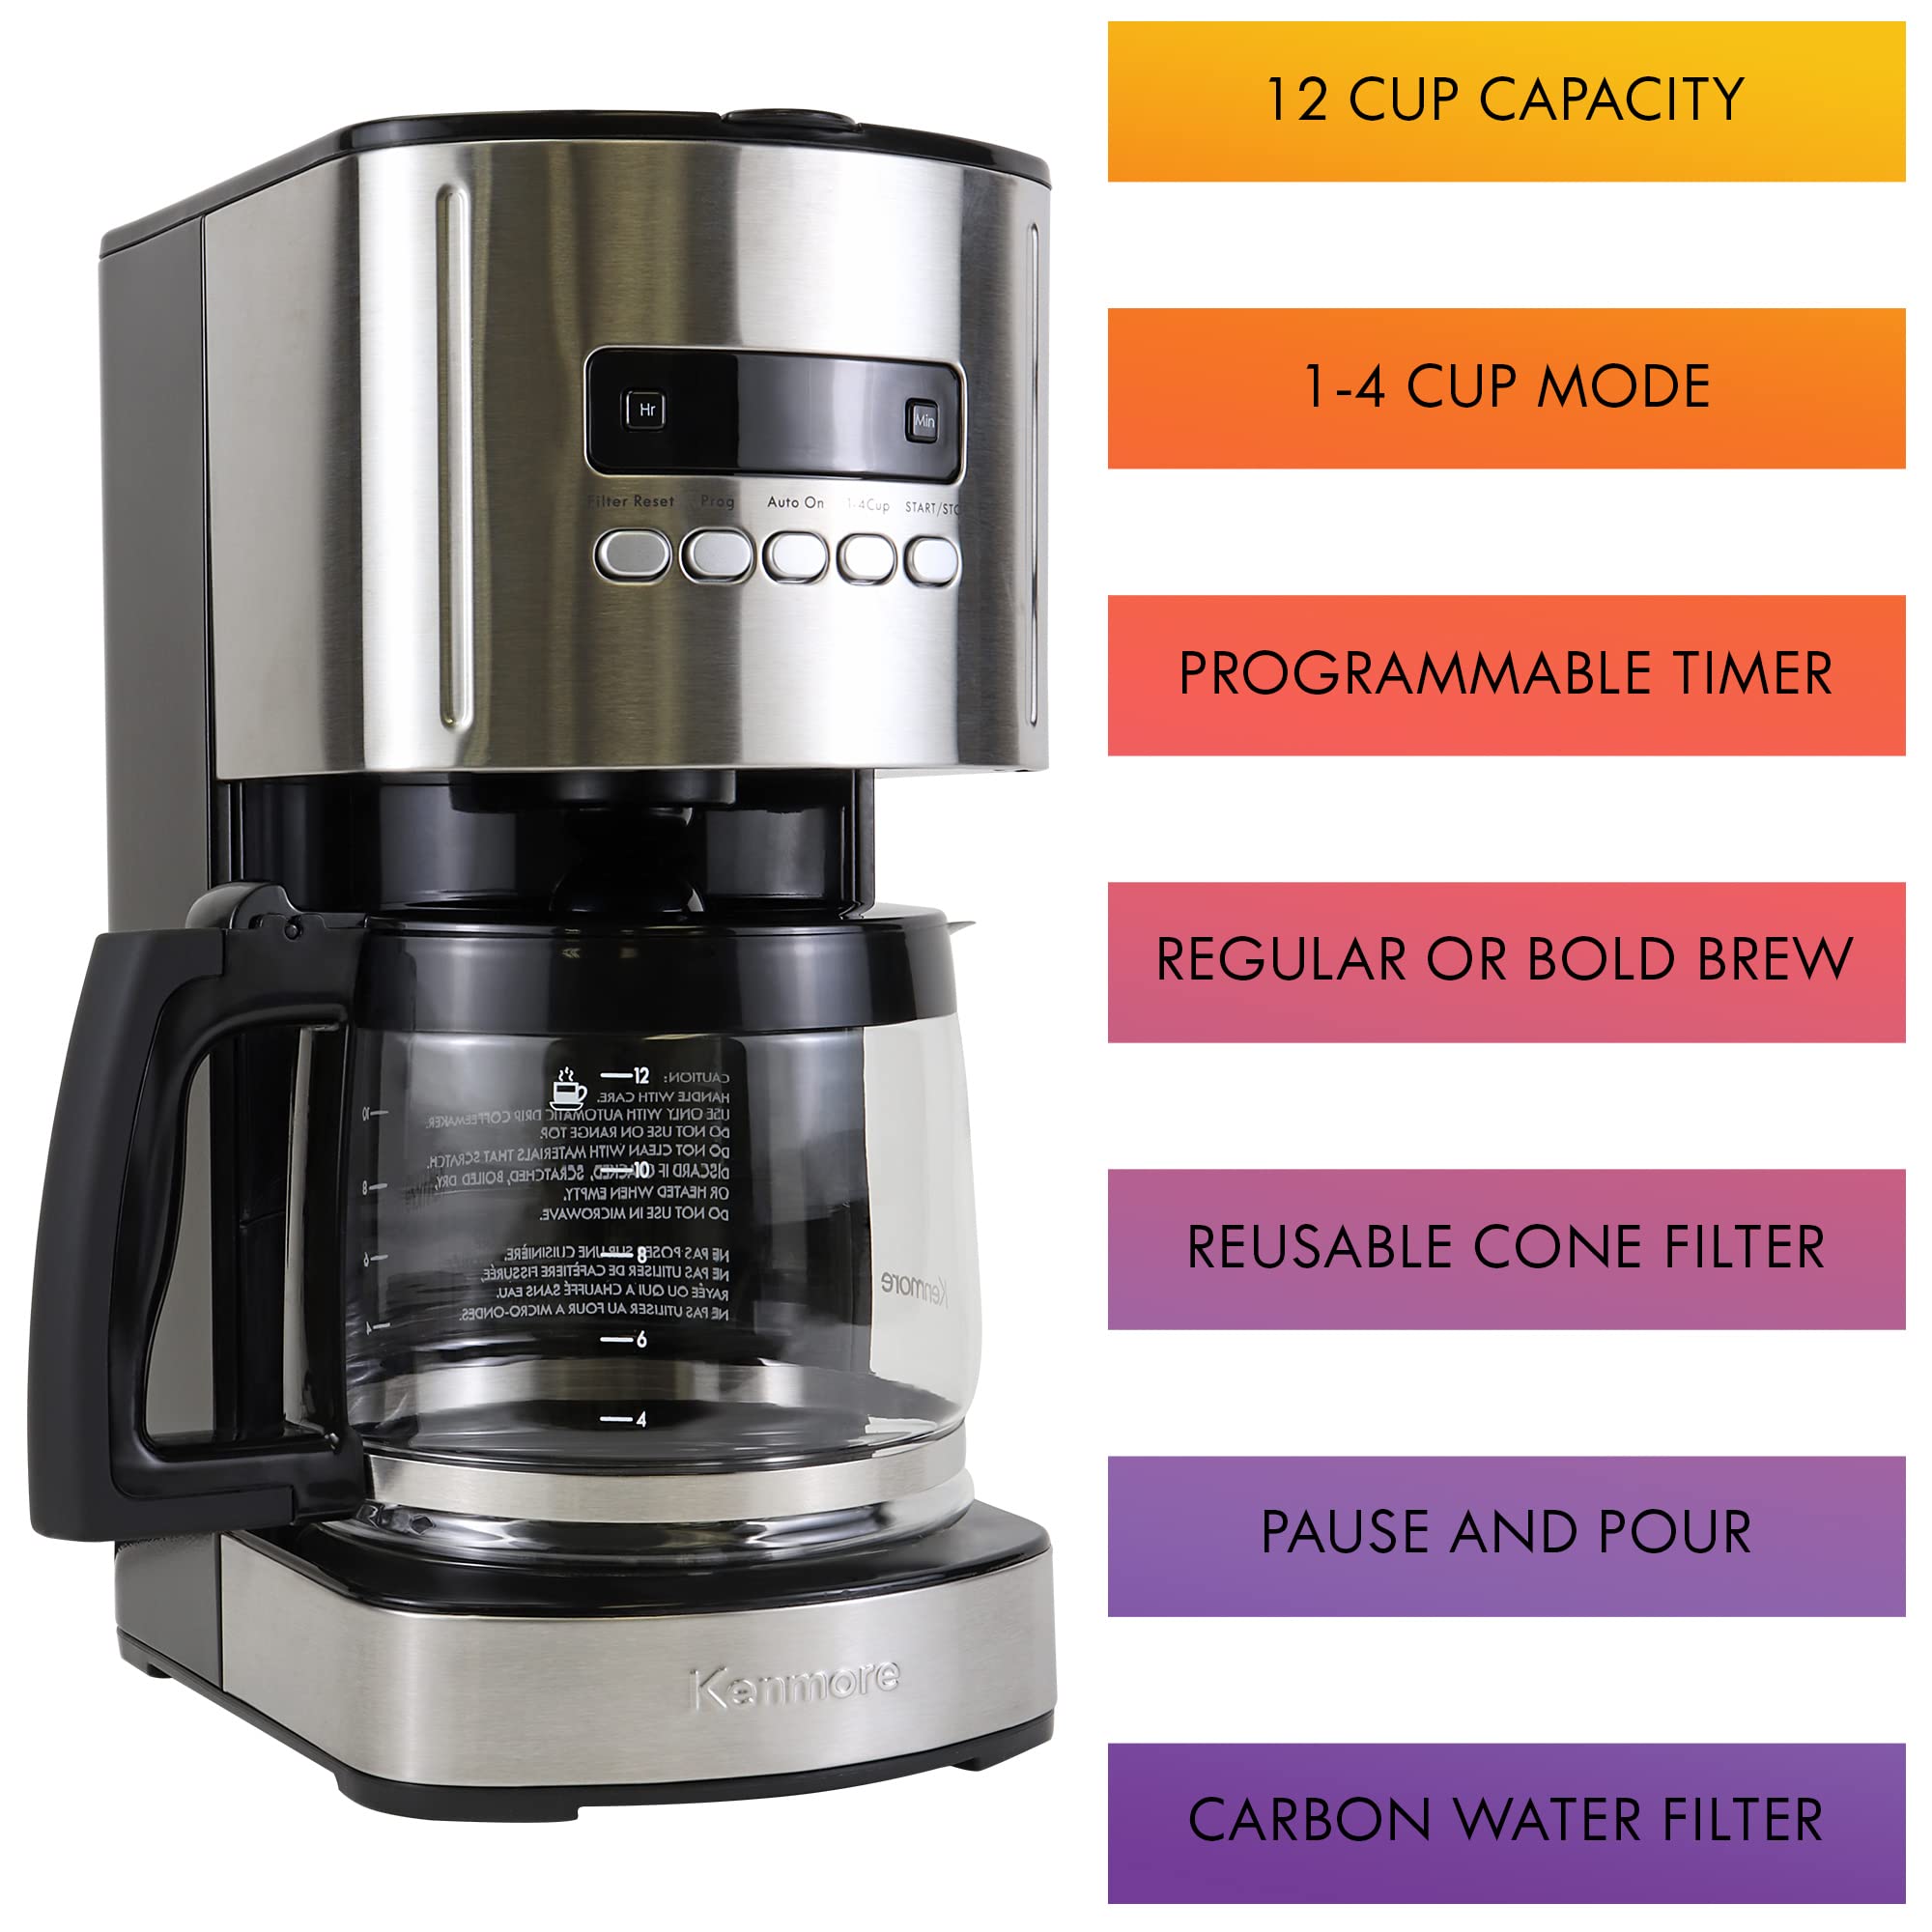 Kenmore Aroma Control Programmable 12-cup Coffee Maker, Stainless Steel/Black with Glass Carafe, LCD Display, Reusable Cone Filter, and Charcoal Water Filter